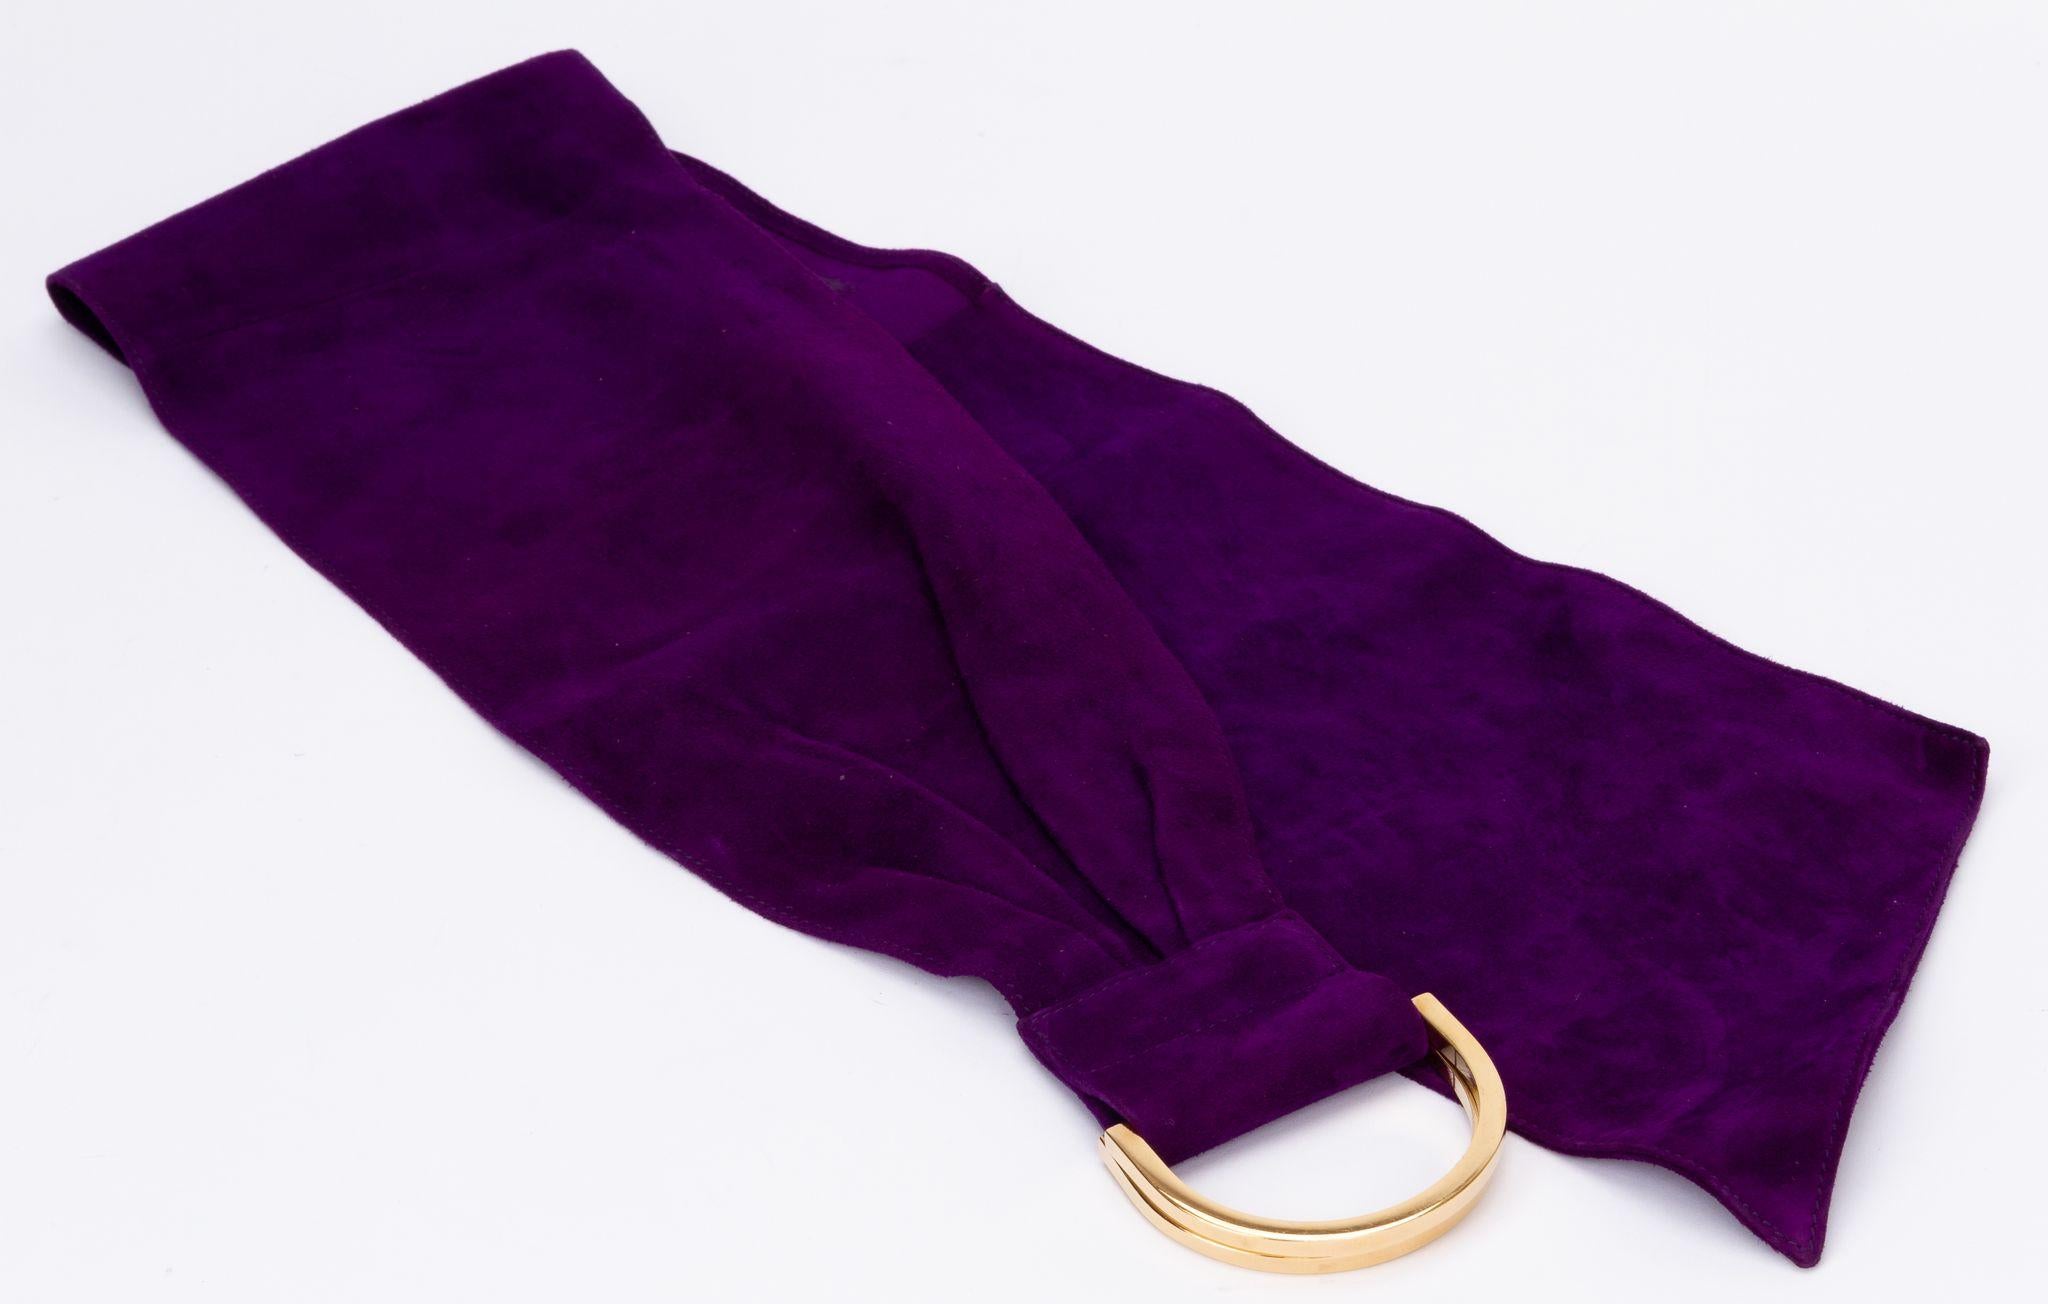 Fendi purple belt. The piece is made out of suede and has width of 5.75